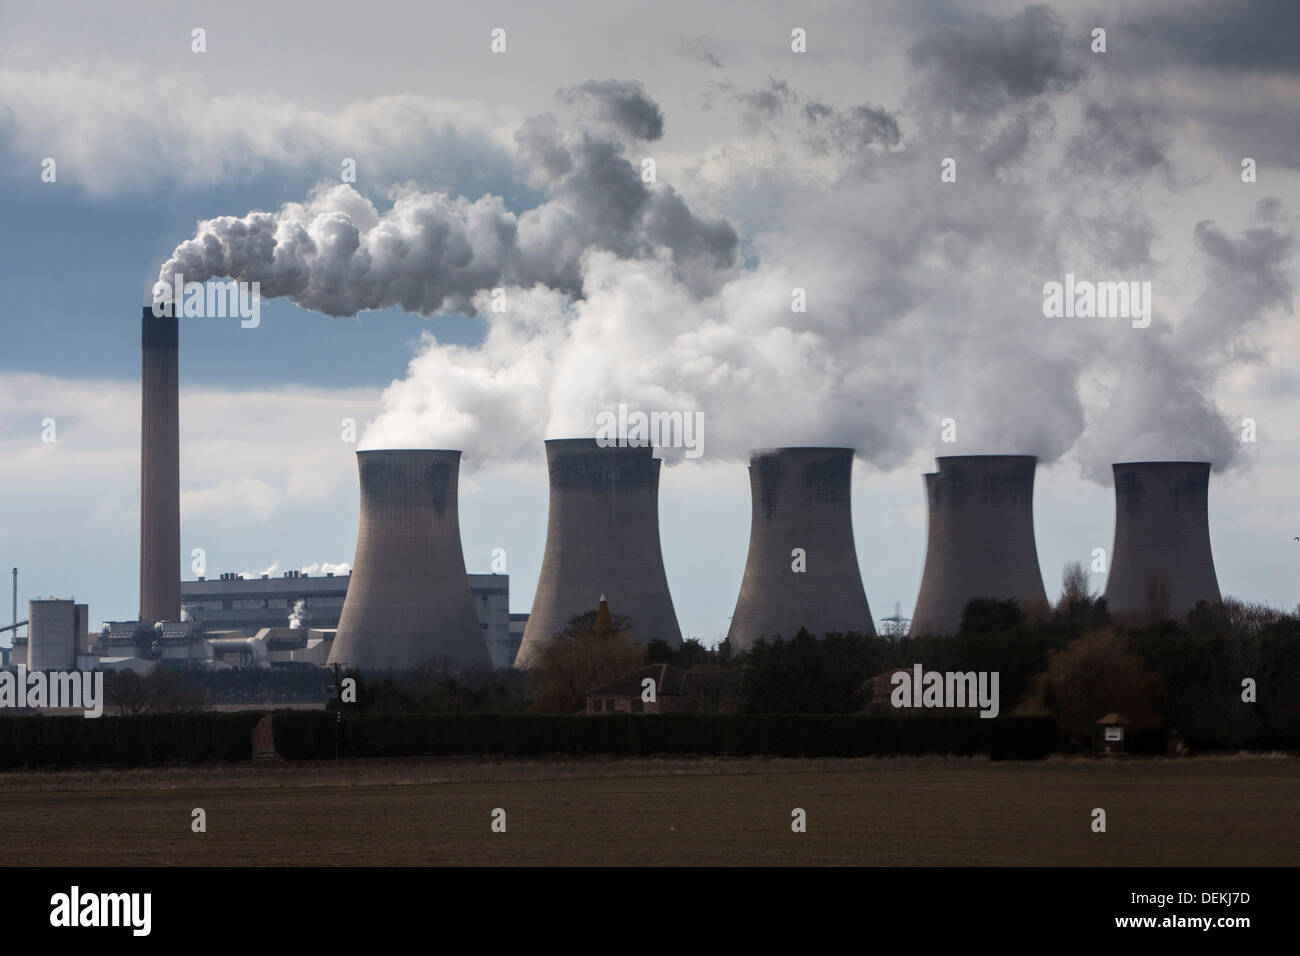 Smoke and steam bellows from the chimneys and cooling towers of Ratcliffe-on-Soar power station Stock Photo